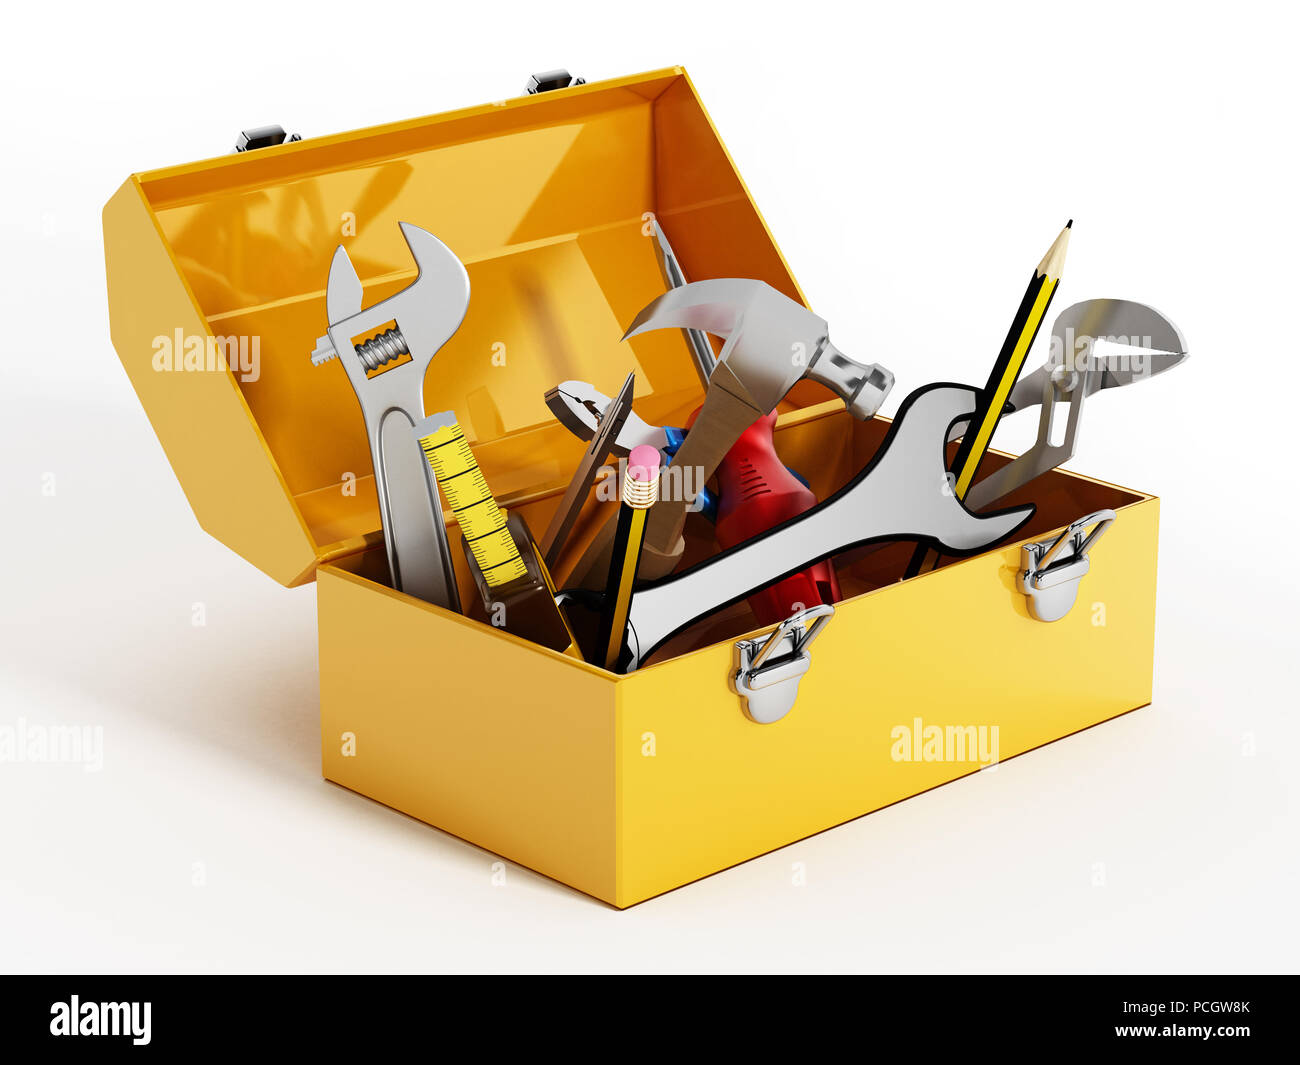 Download Yellow Toolbox With Hand Tools 3d Illustration Stock Photo Alamy Yellowimages Mockups